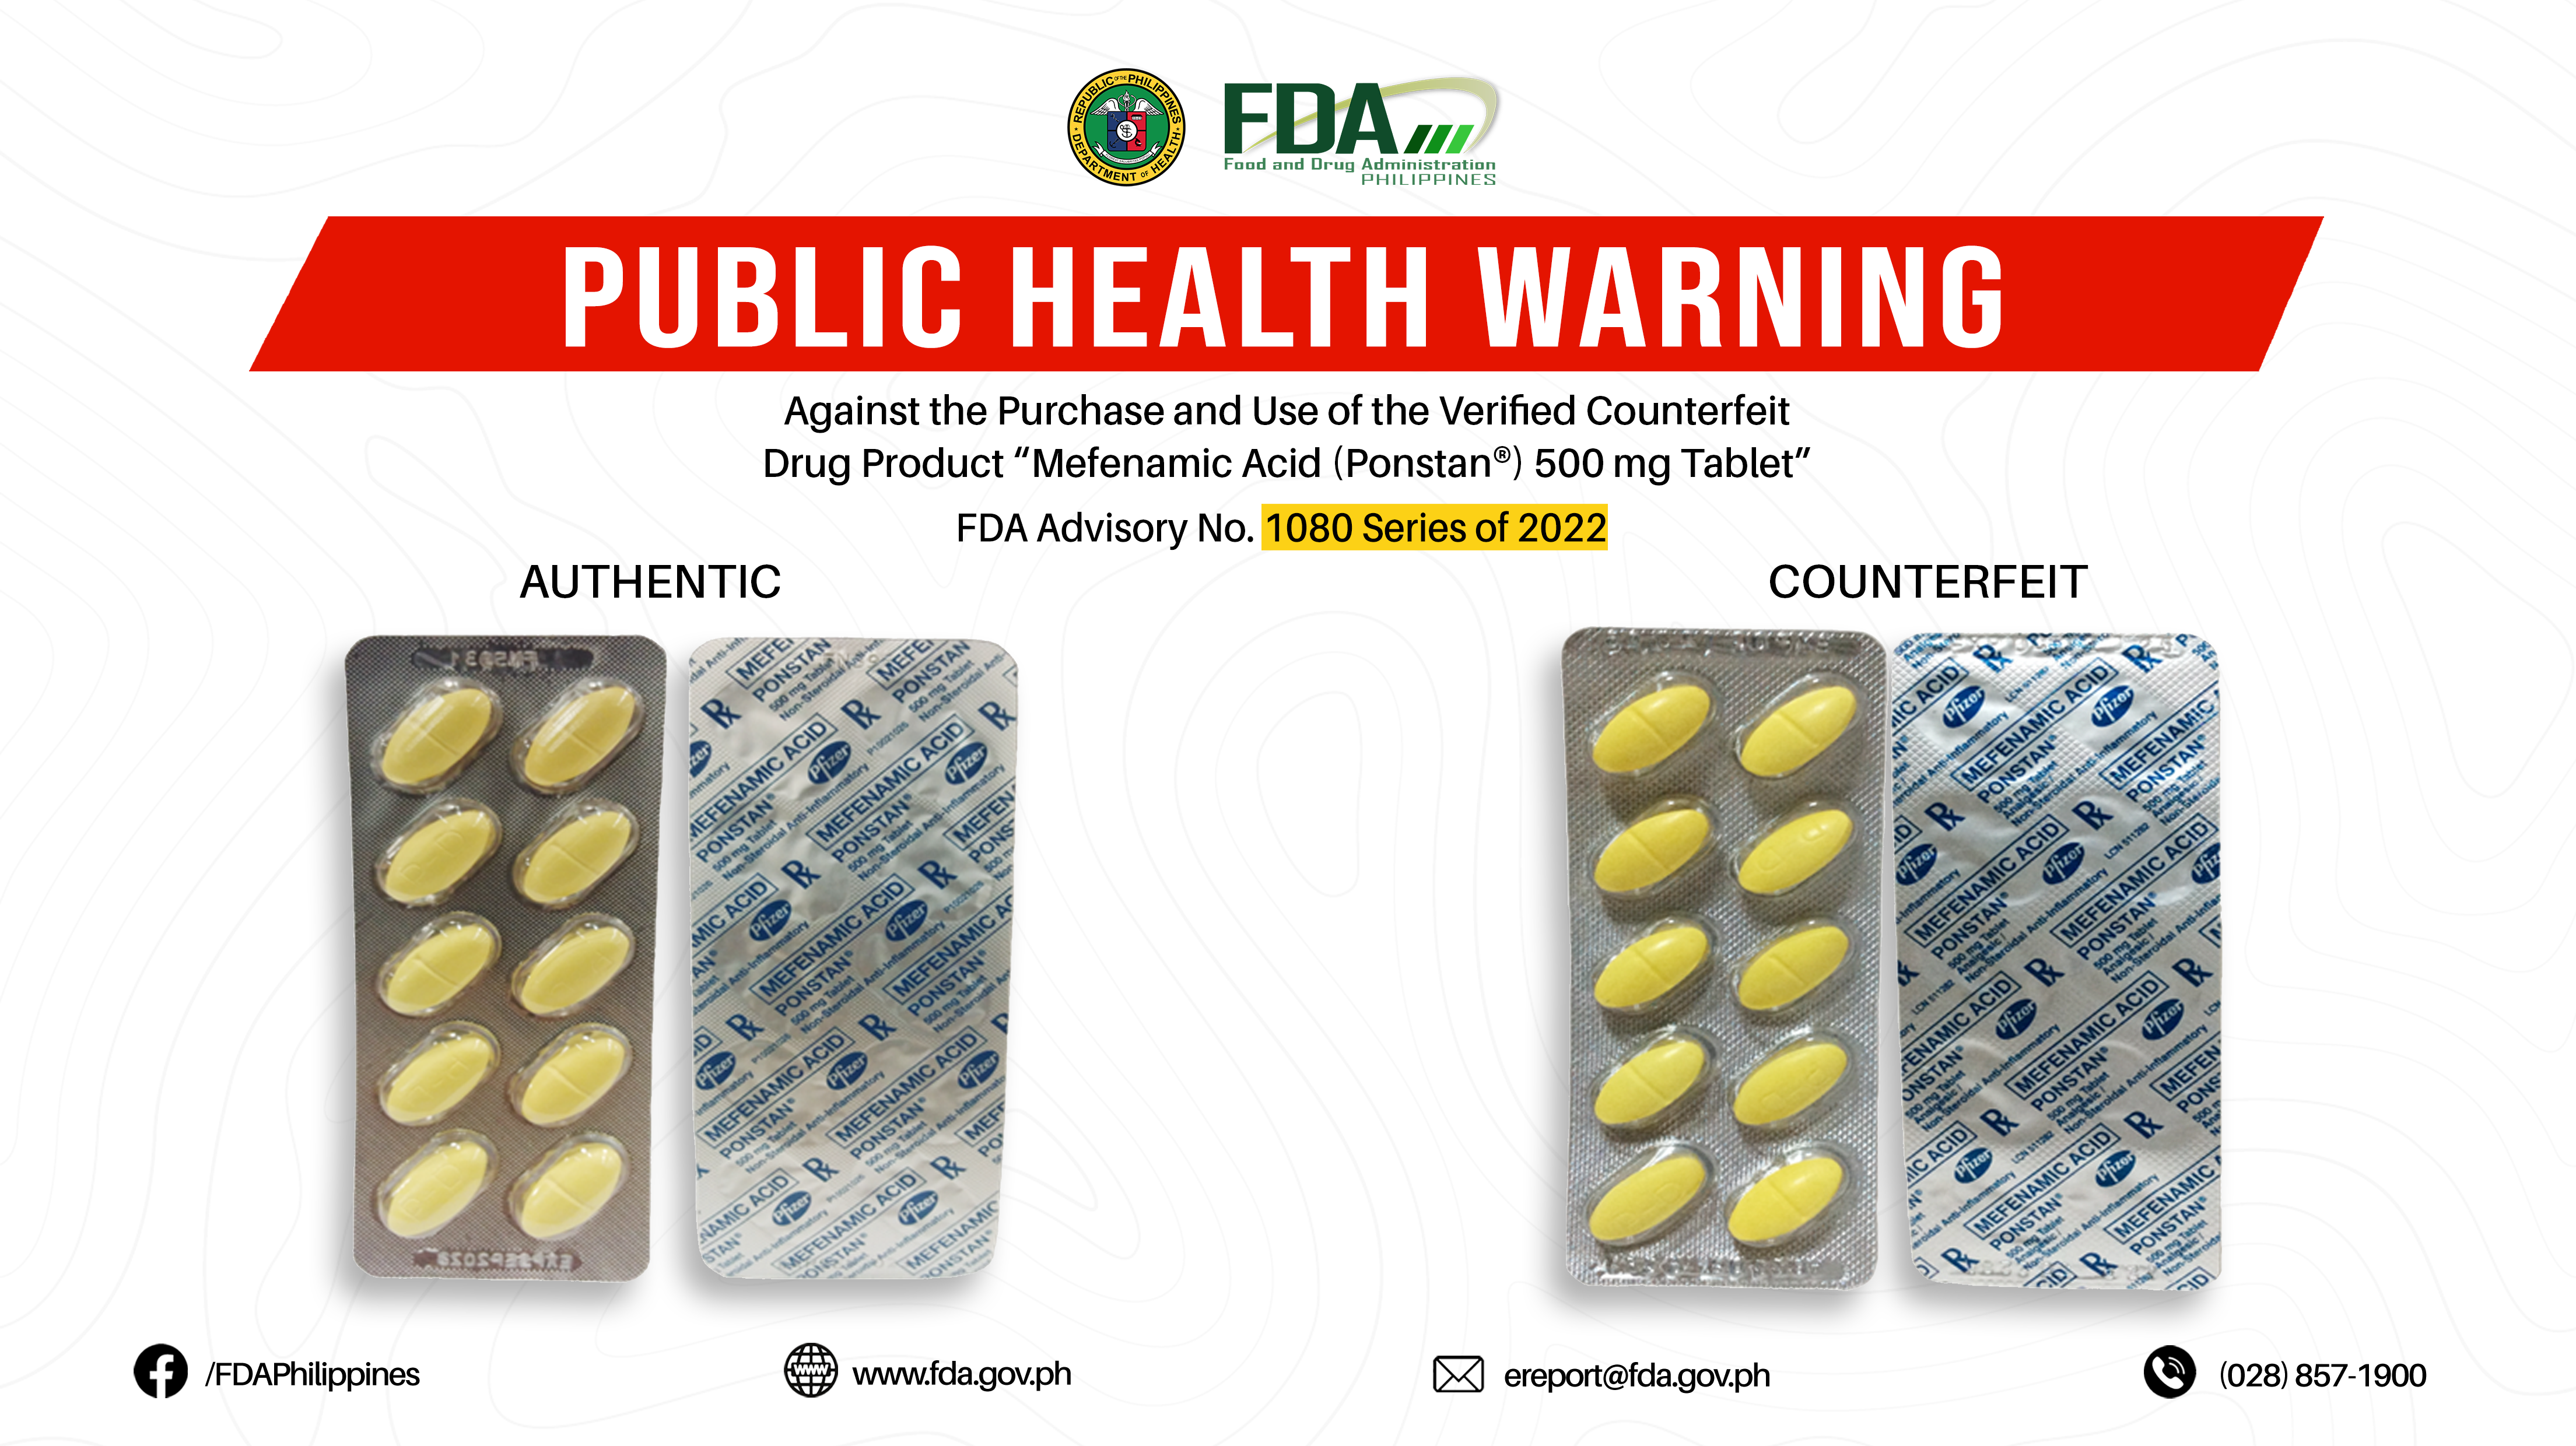 FDA Advisory No.2022-1080 || Public Health Warning Against the Purchase and Use of the Verified Counterfeit Drug Product “Mefenamic Acid (Ponstan®) 500 mg Tablet”